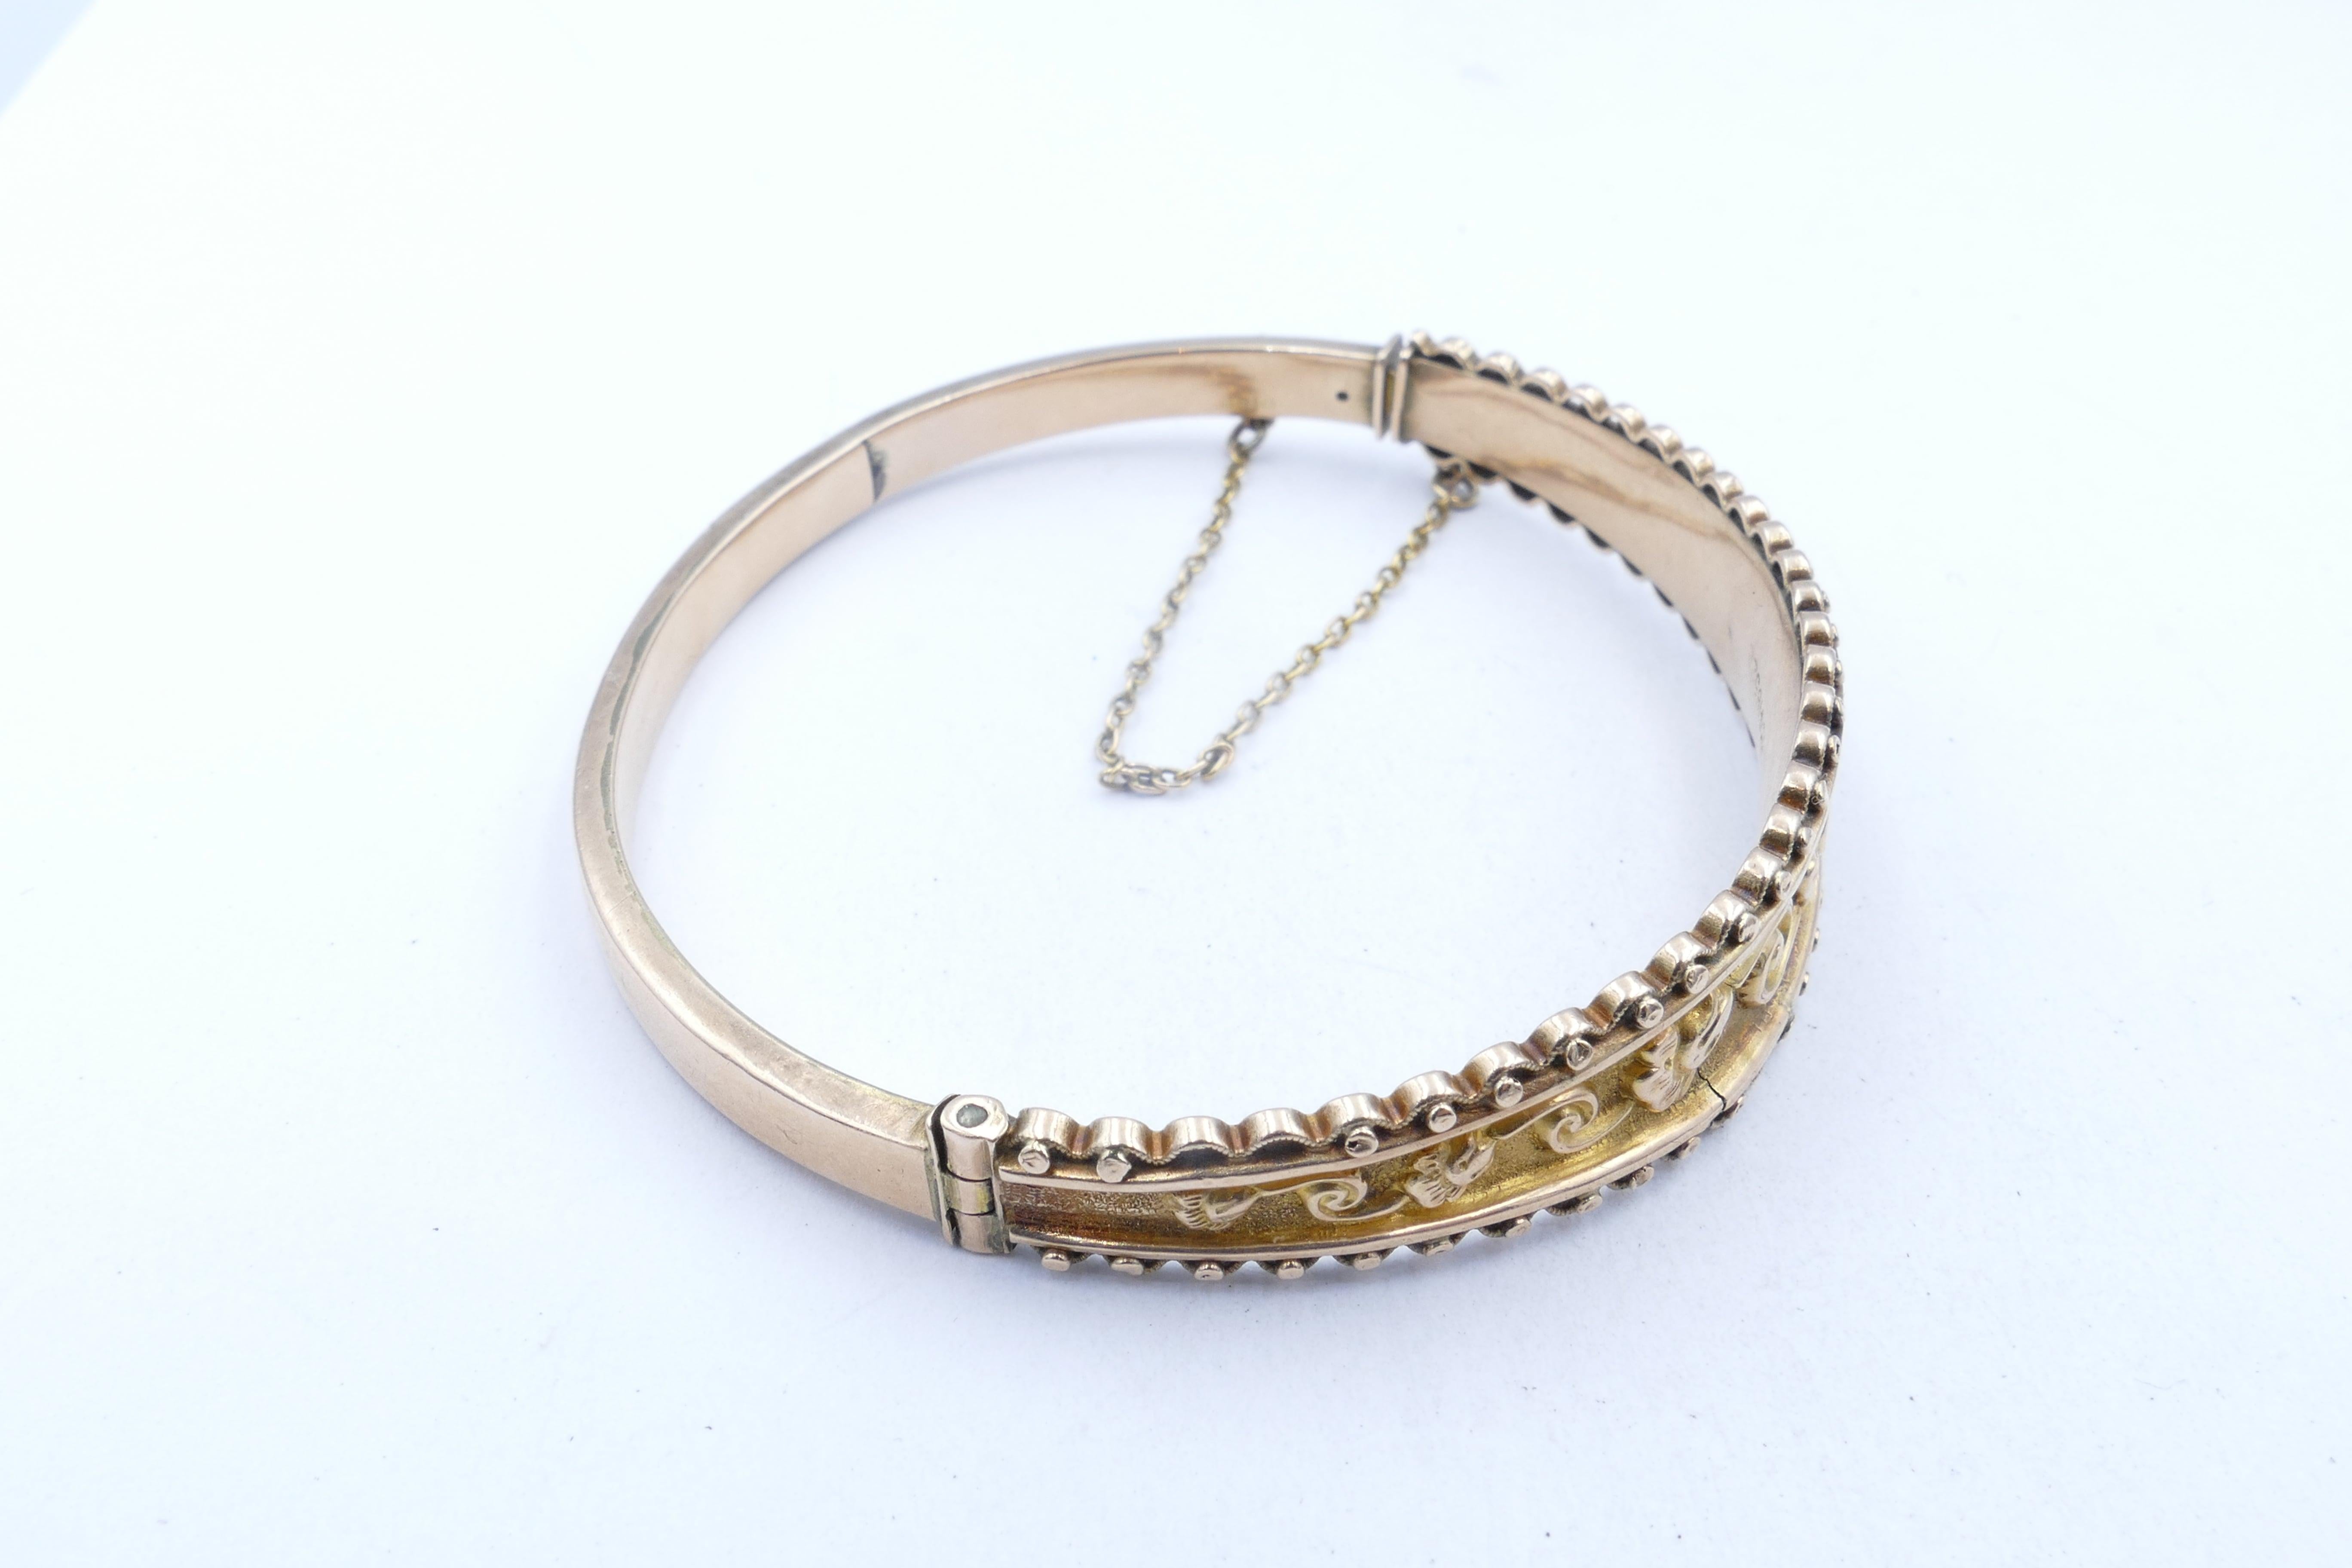 What a very pretty Bangle this is. Edwardian - circa 1905, it is embossed with floral motifs over a textured backdrop with scalloping bead edges at the gallery.
It has a box clasp closure with one oval link safety chain.
It displays English Assay